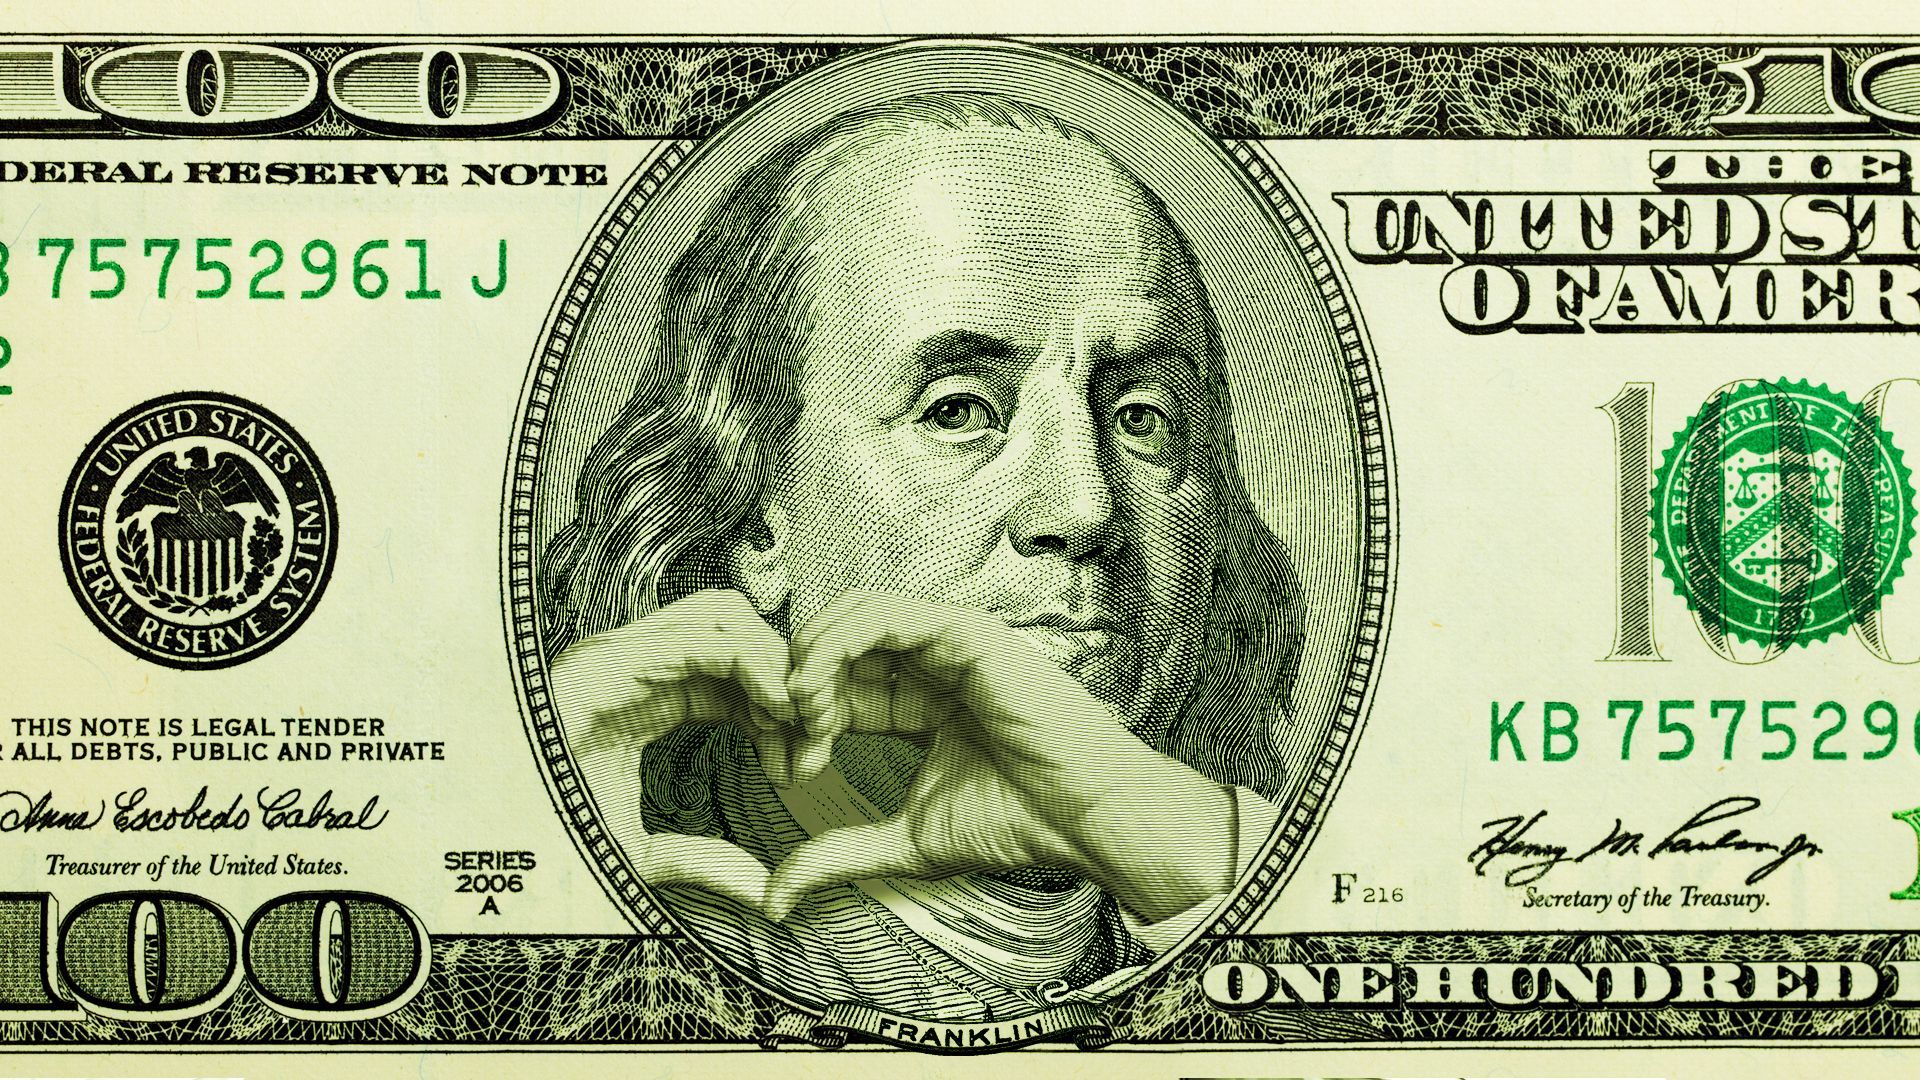 Illustration of Benjamin Franklin on a hundred dollar bill making the heart sign with his hands